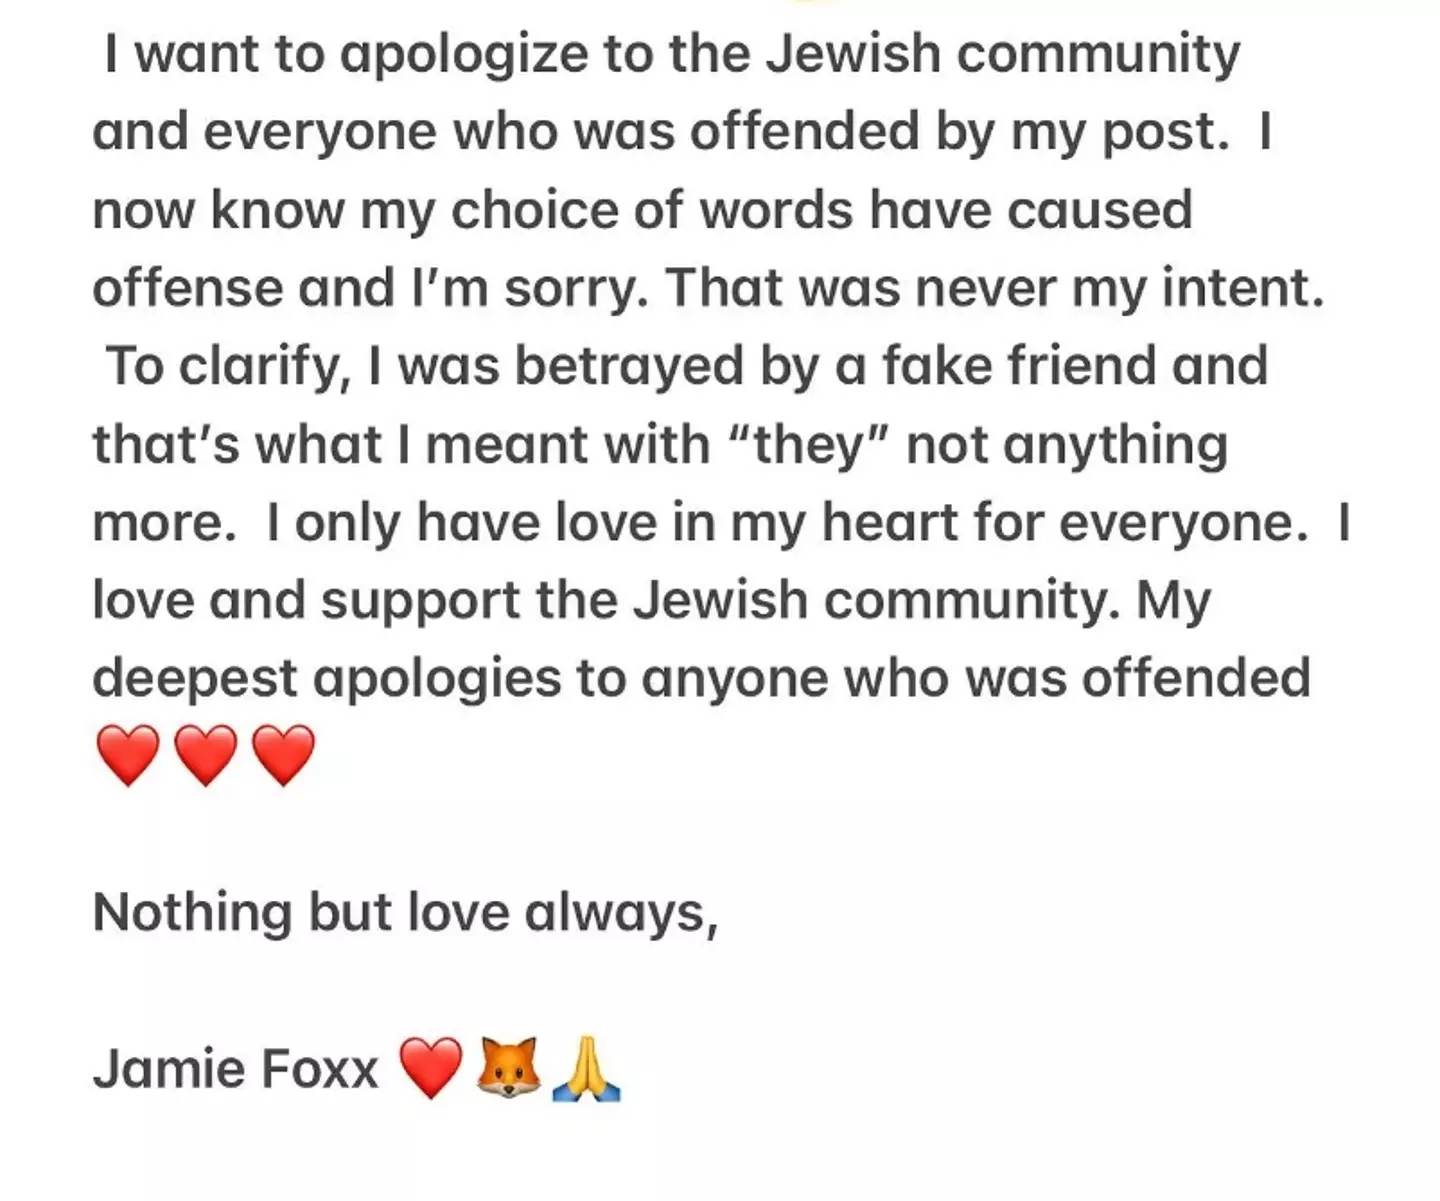 Jamie Foxx issued an apology after a now-deleted Instagram post was accused of antisemitism.